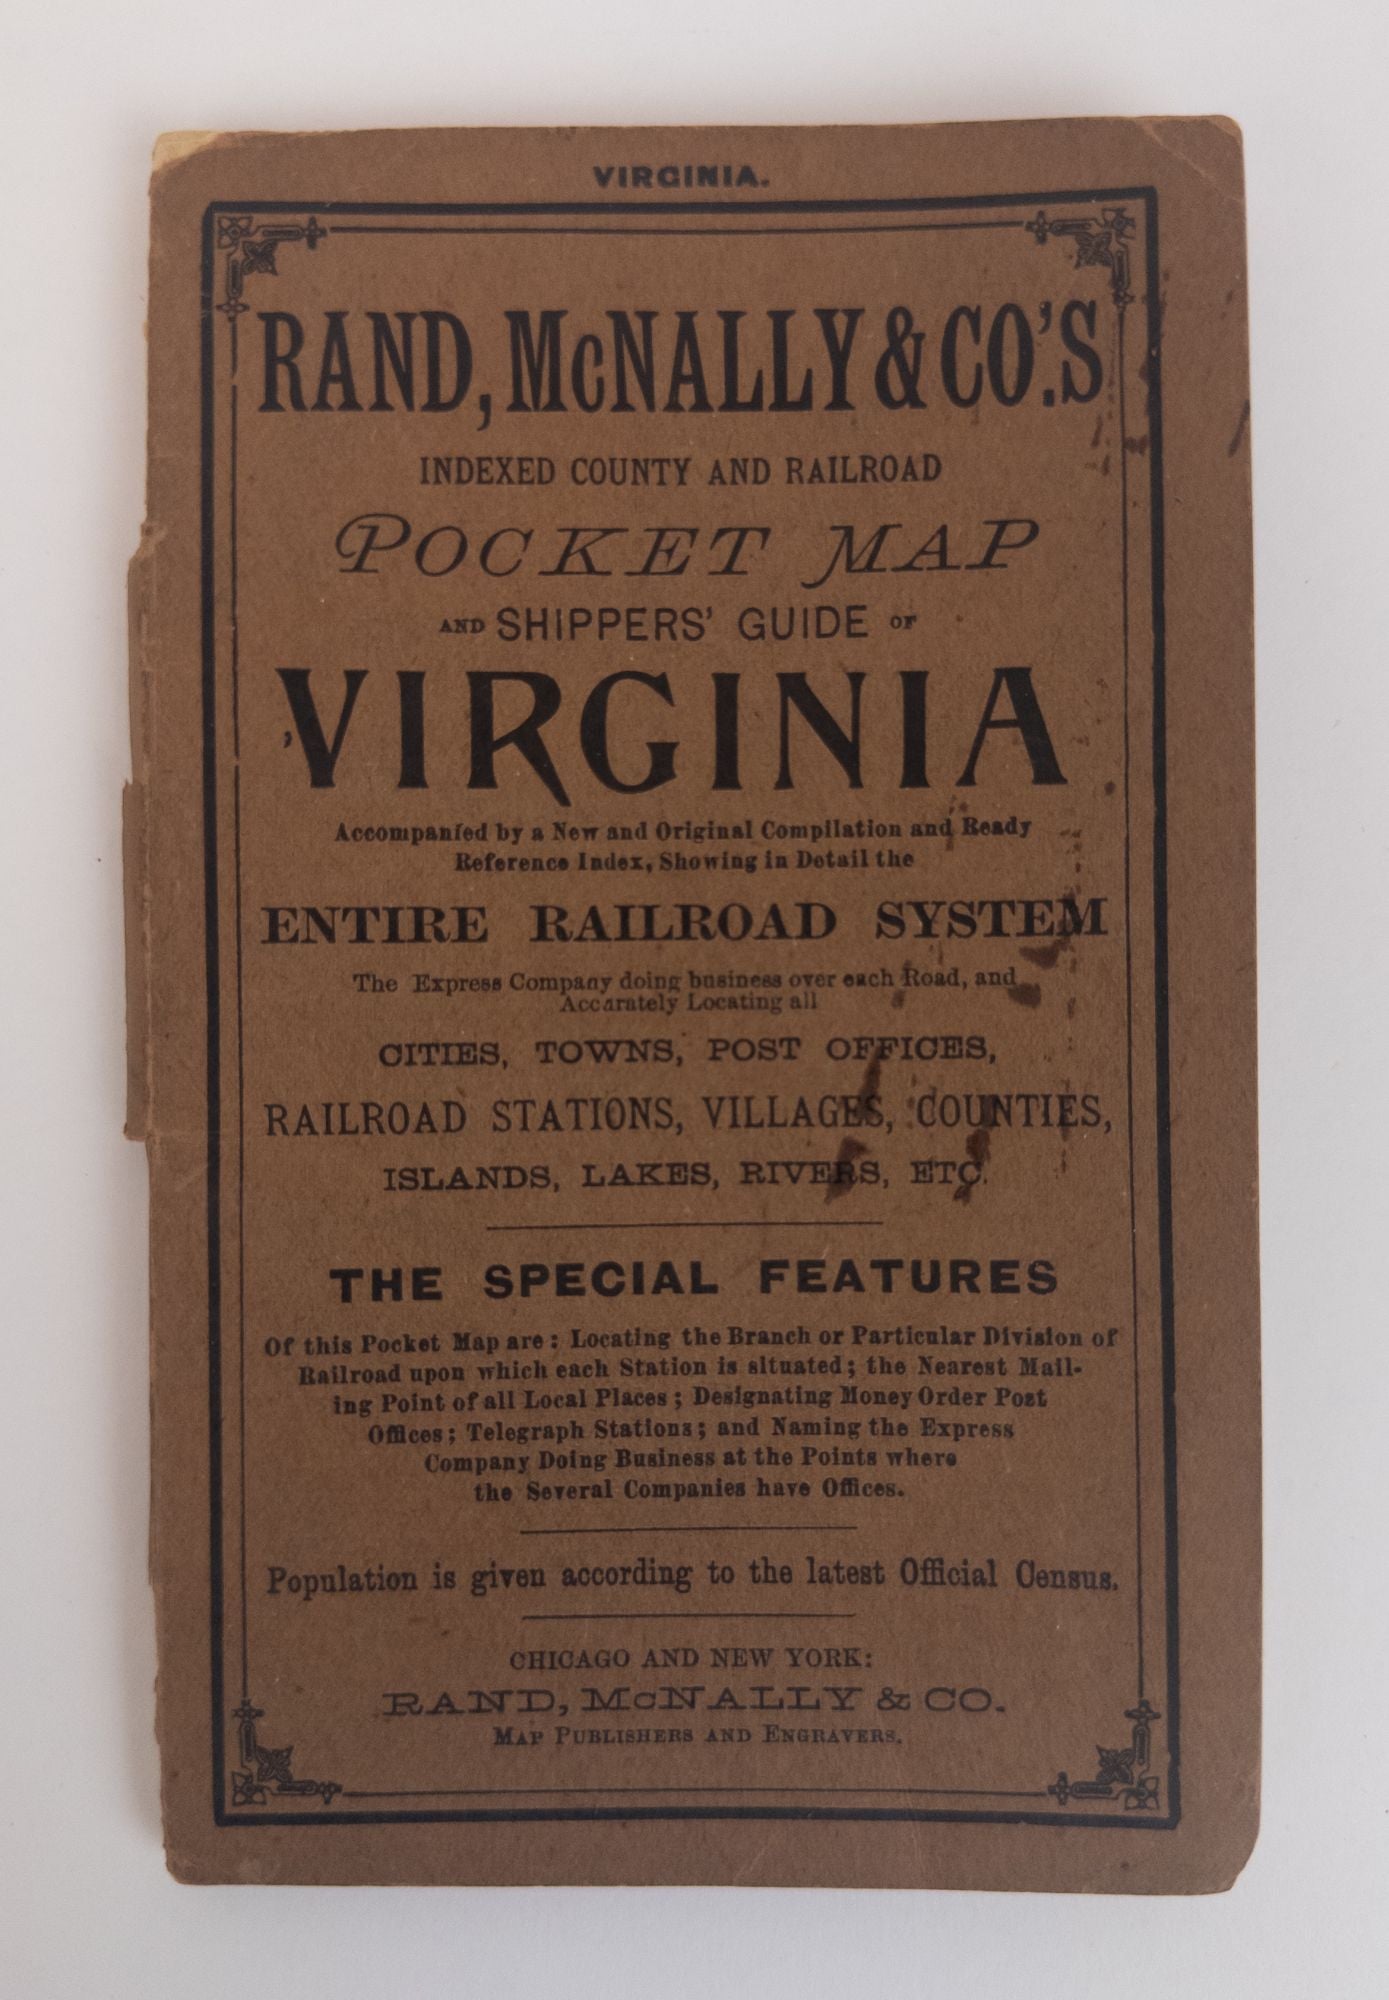 Product Image for Rand, McNally & Co.'s Indexed County and Railroad Pocket Map and Shippers' Guide of Virginia Accompanied by a New and Original Compilation and Ready Reference Index, Showing in Detail the Entire Railroad System, The Express Company Doing Business over eac